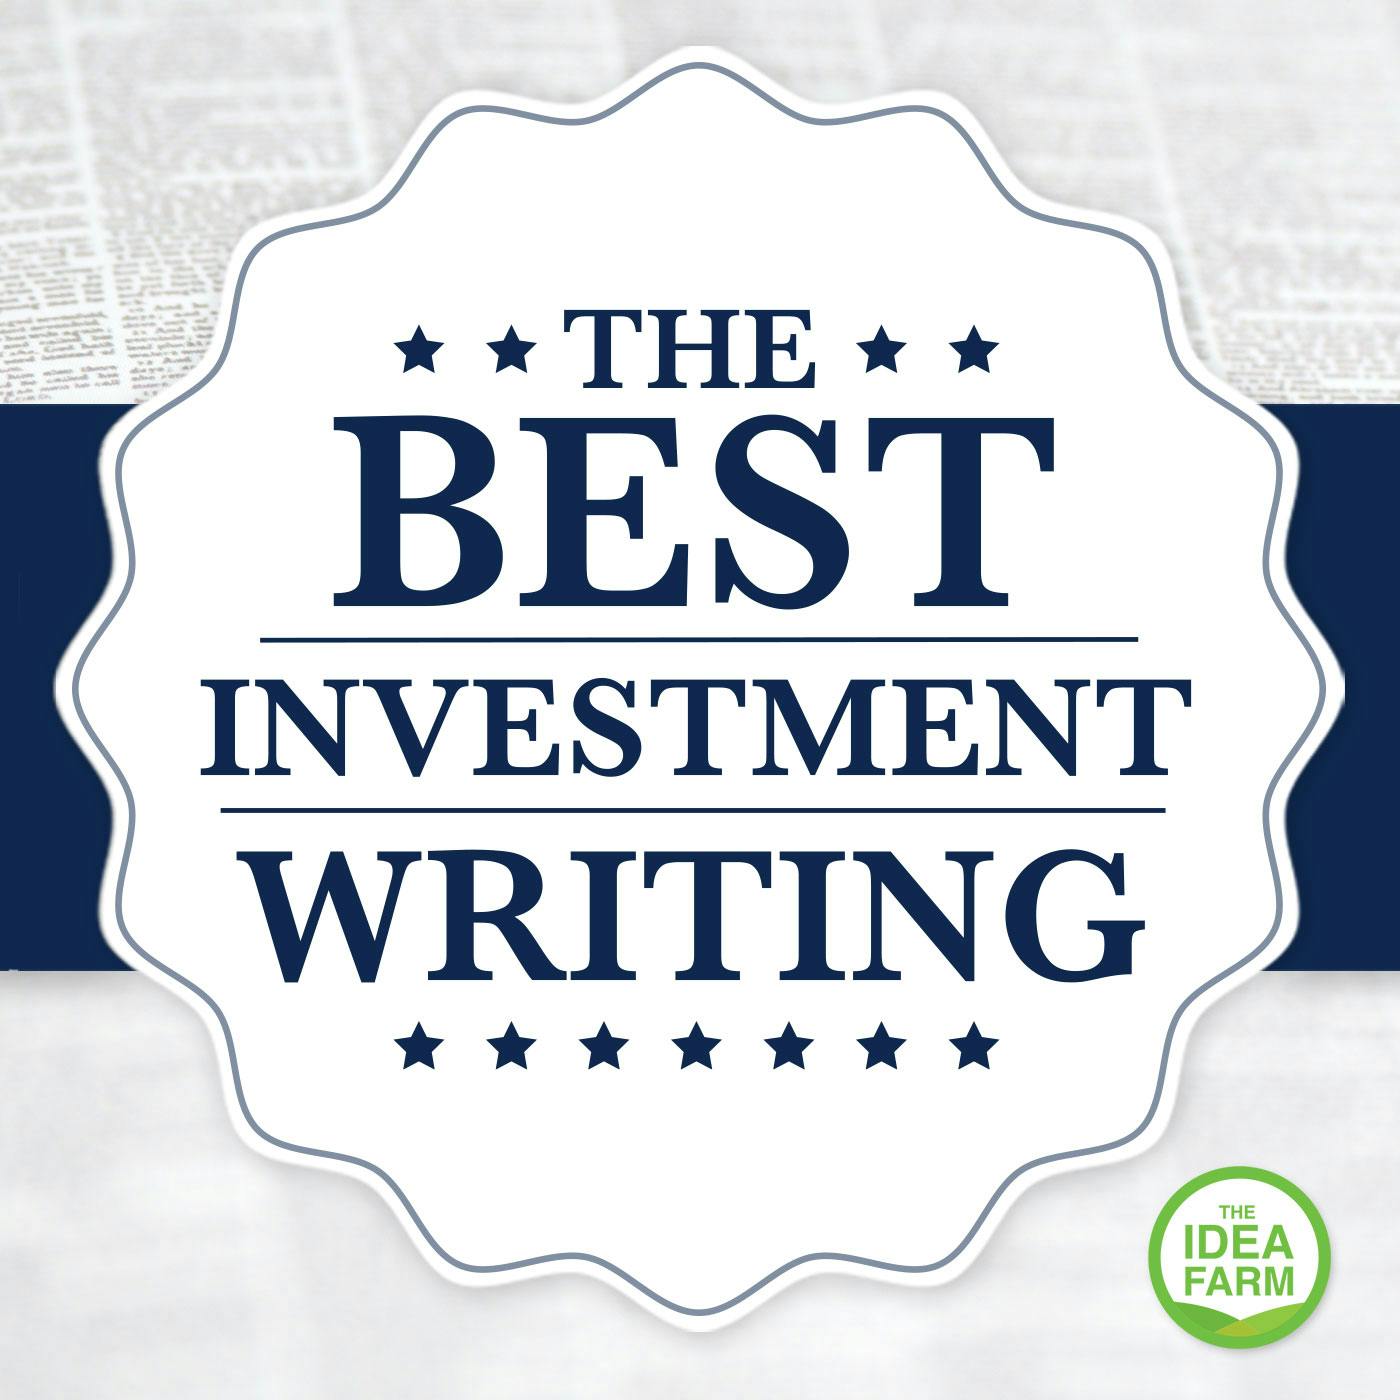 The Best Investment Writing Volume 3: Justin J. Carbonneau – 10 Reasons Why It’s Tough to be a True “Intelligent Investor”